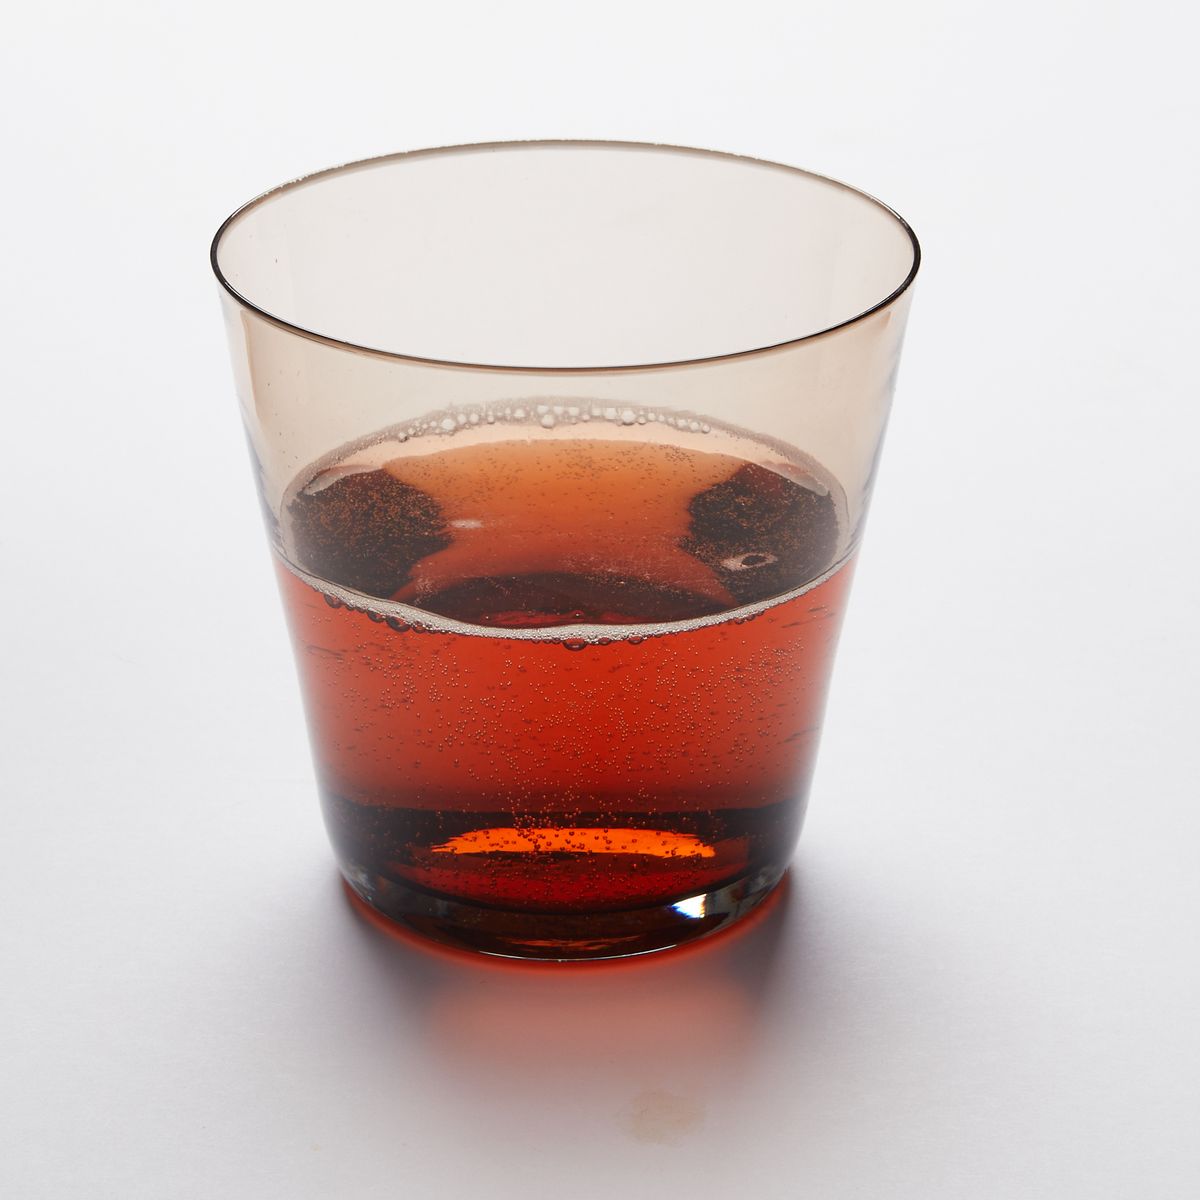 A short drinking glass made of walnut colored glass, filled with amber drink